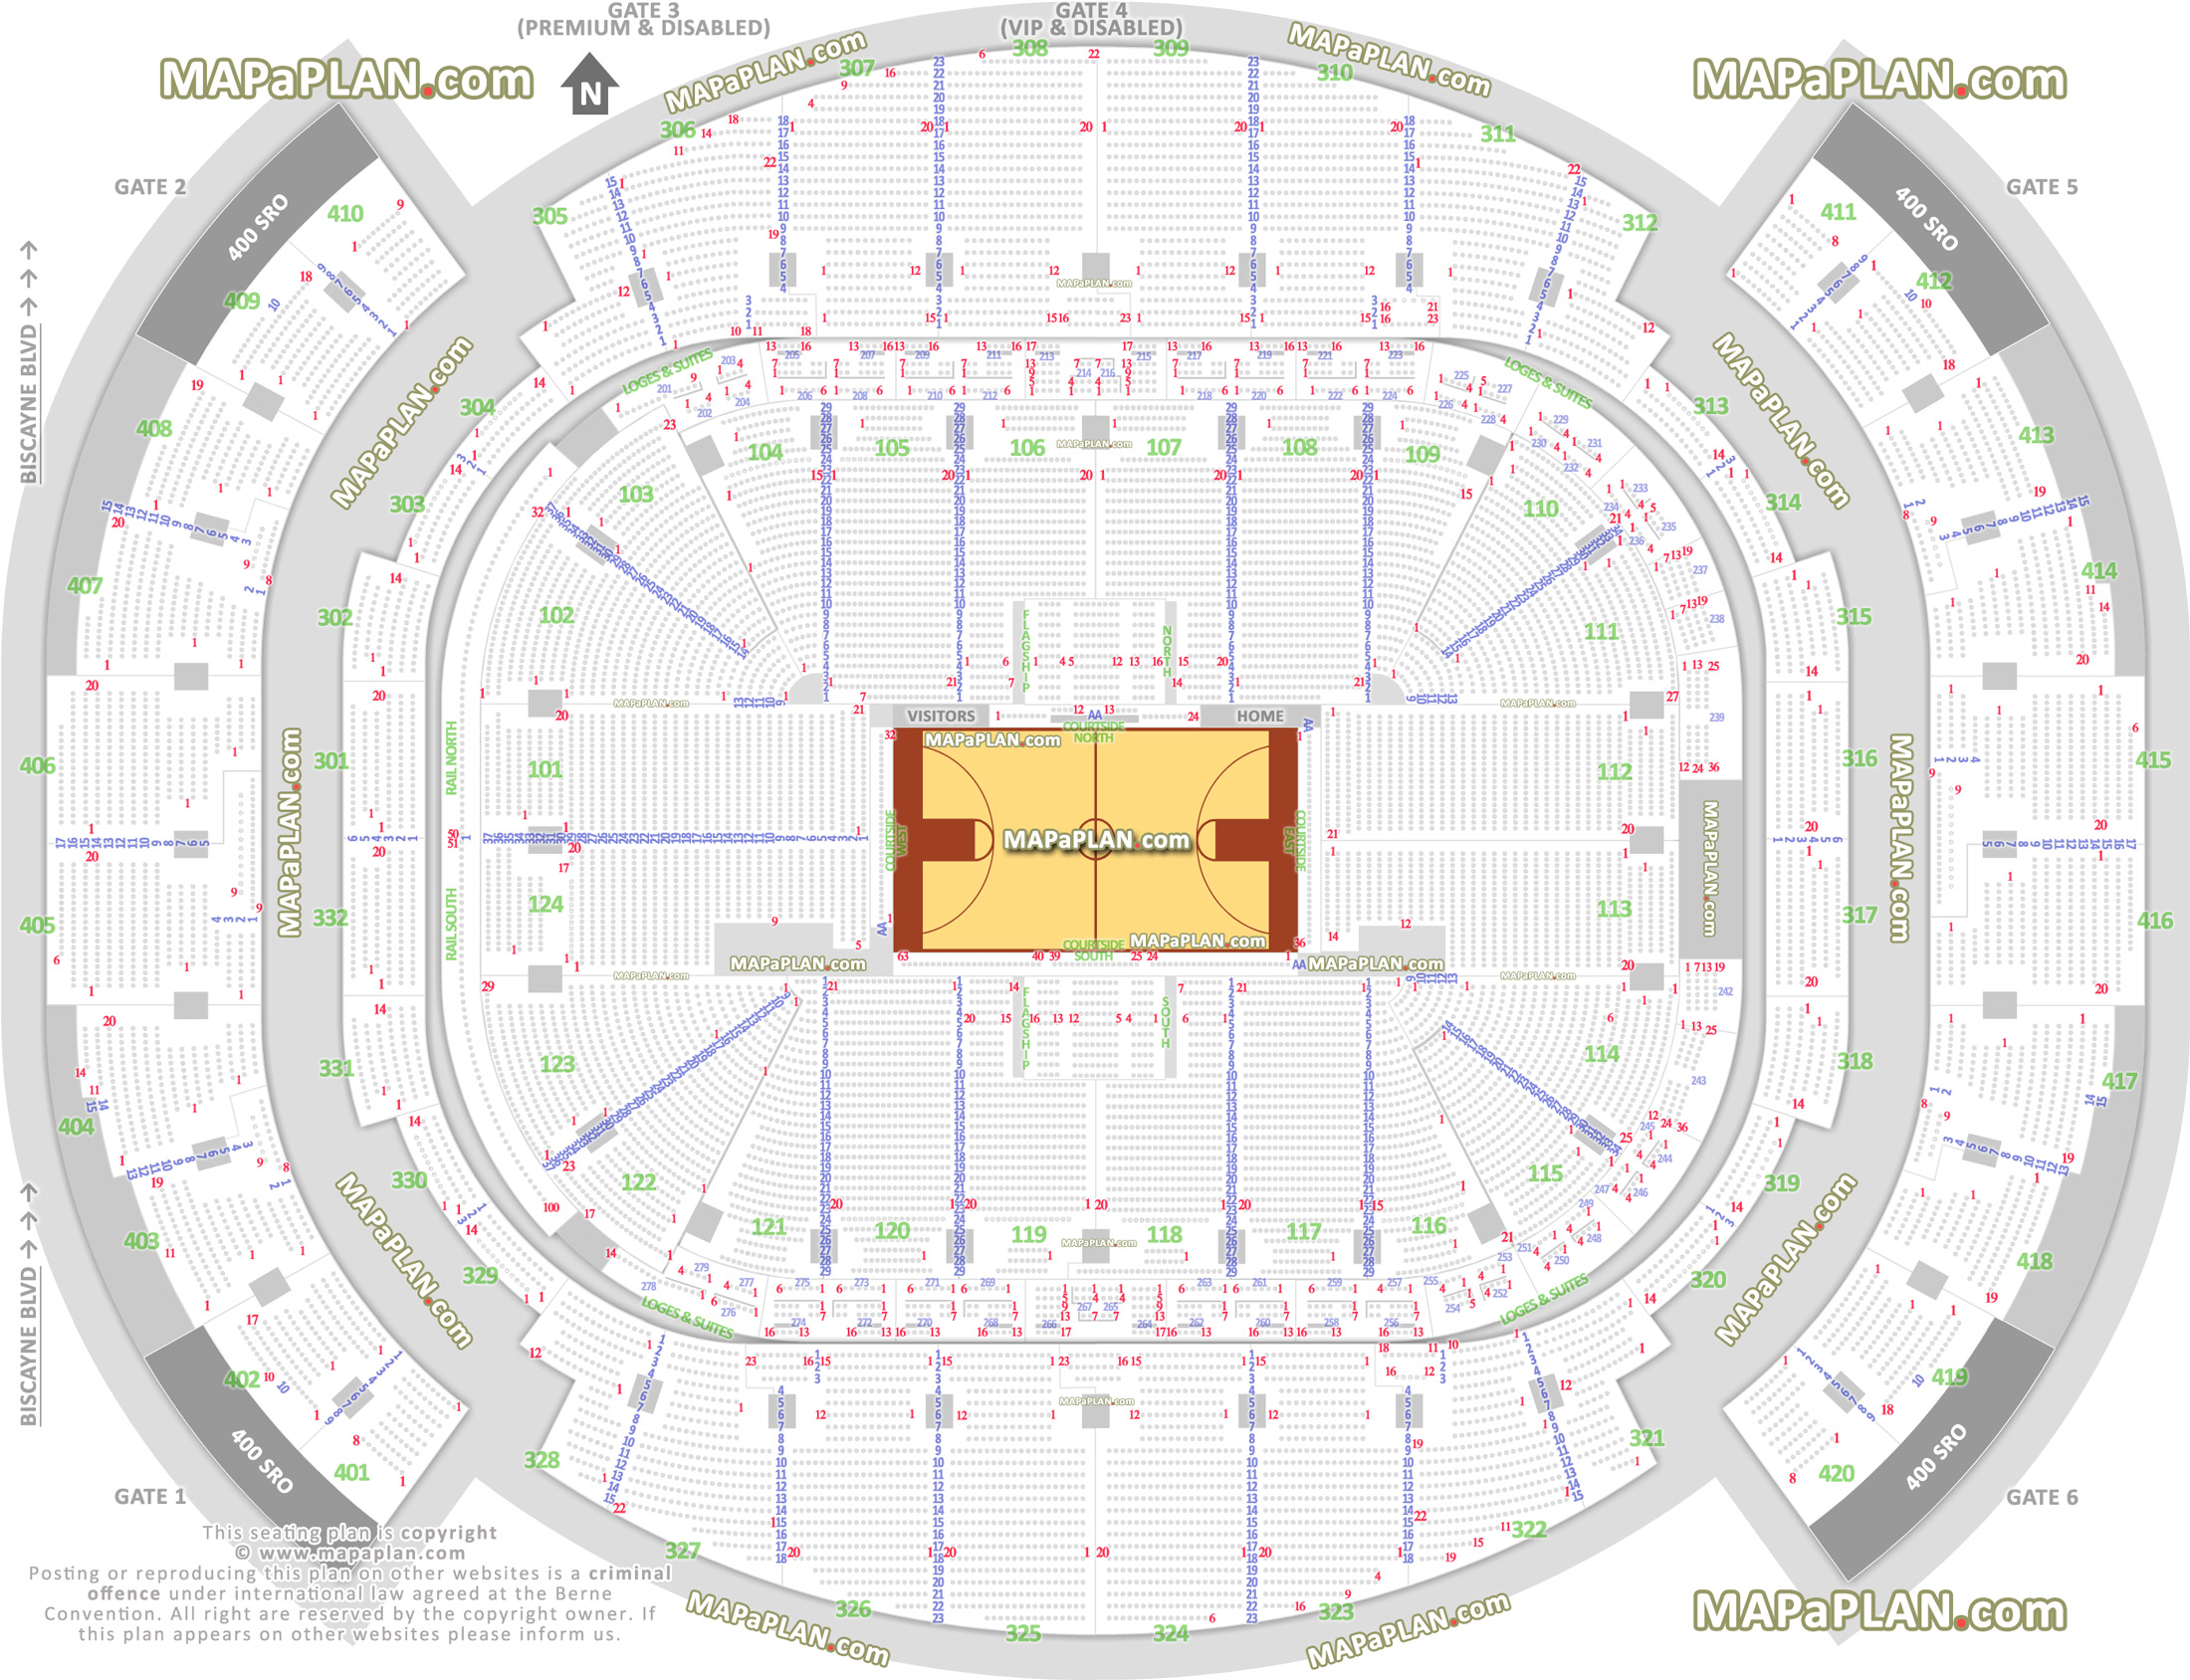 american-airlines-arena-miami-seating-chart-03-heat-stadium-nba-basketball-game-center-venue-gate-map-individual-locator-courtside-sideline-high-resolution.jpg